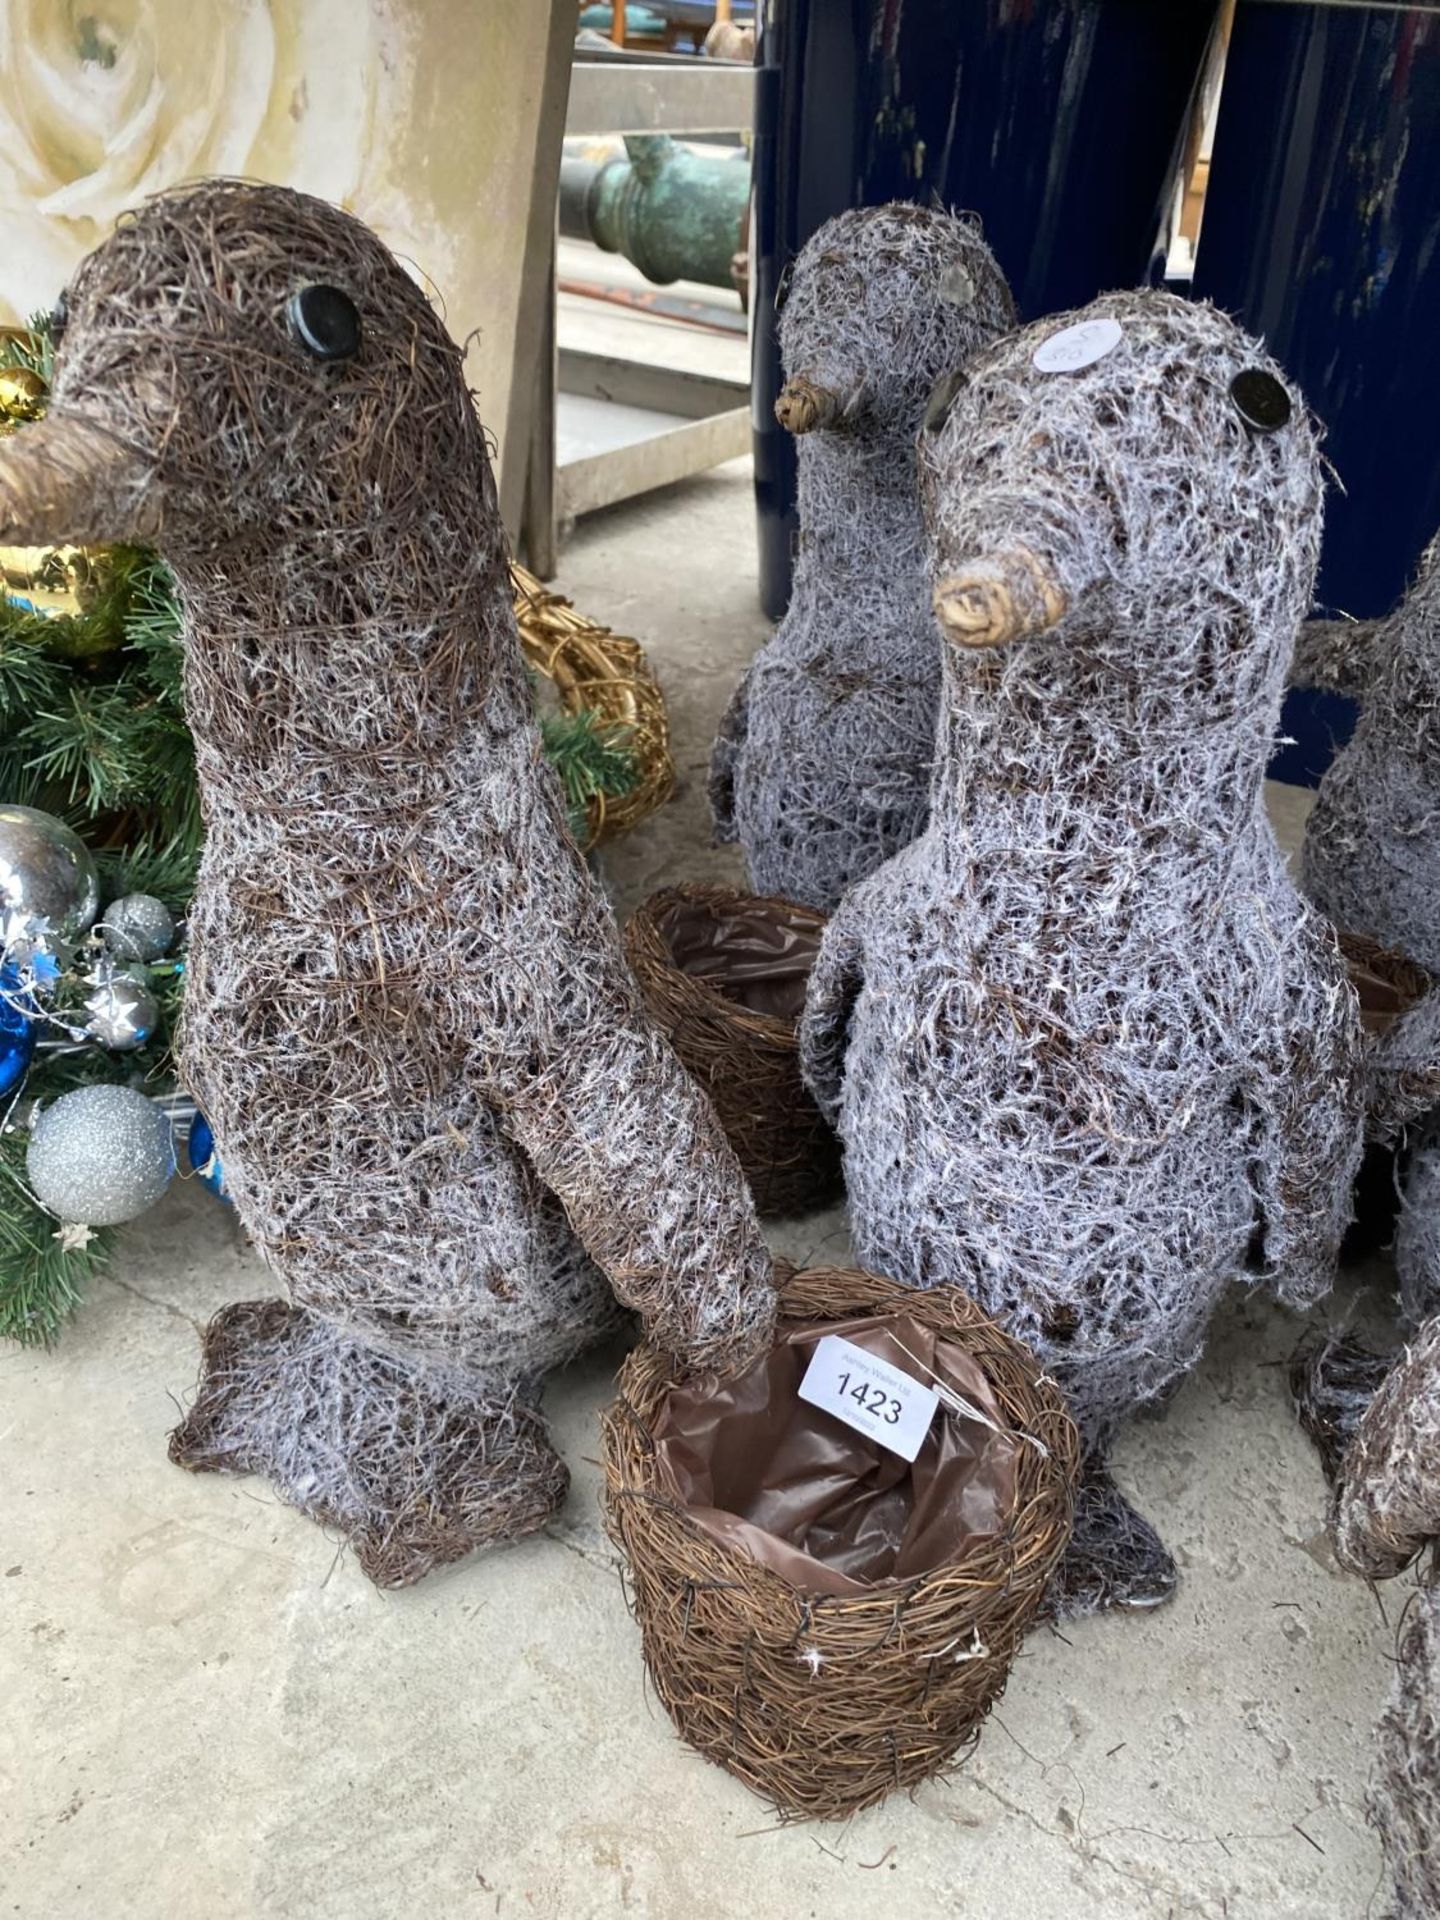 EIGHT WICKER PENGUIN CHRISTMAS PLANTERS - Image 3 of 3